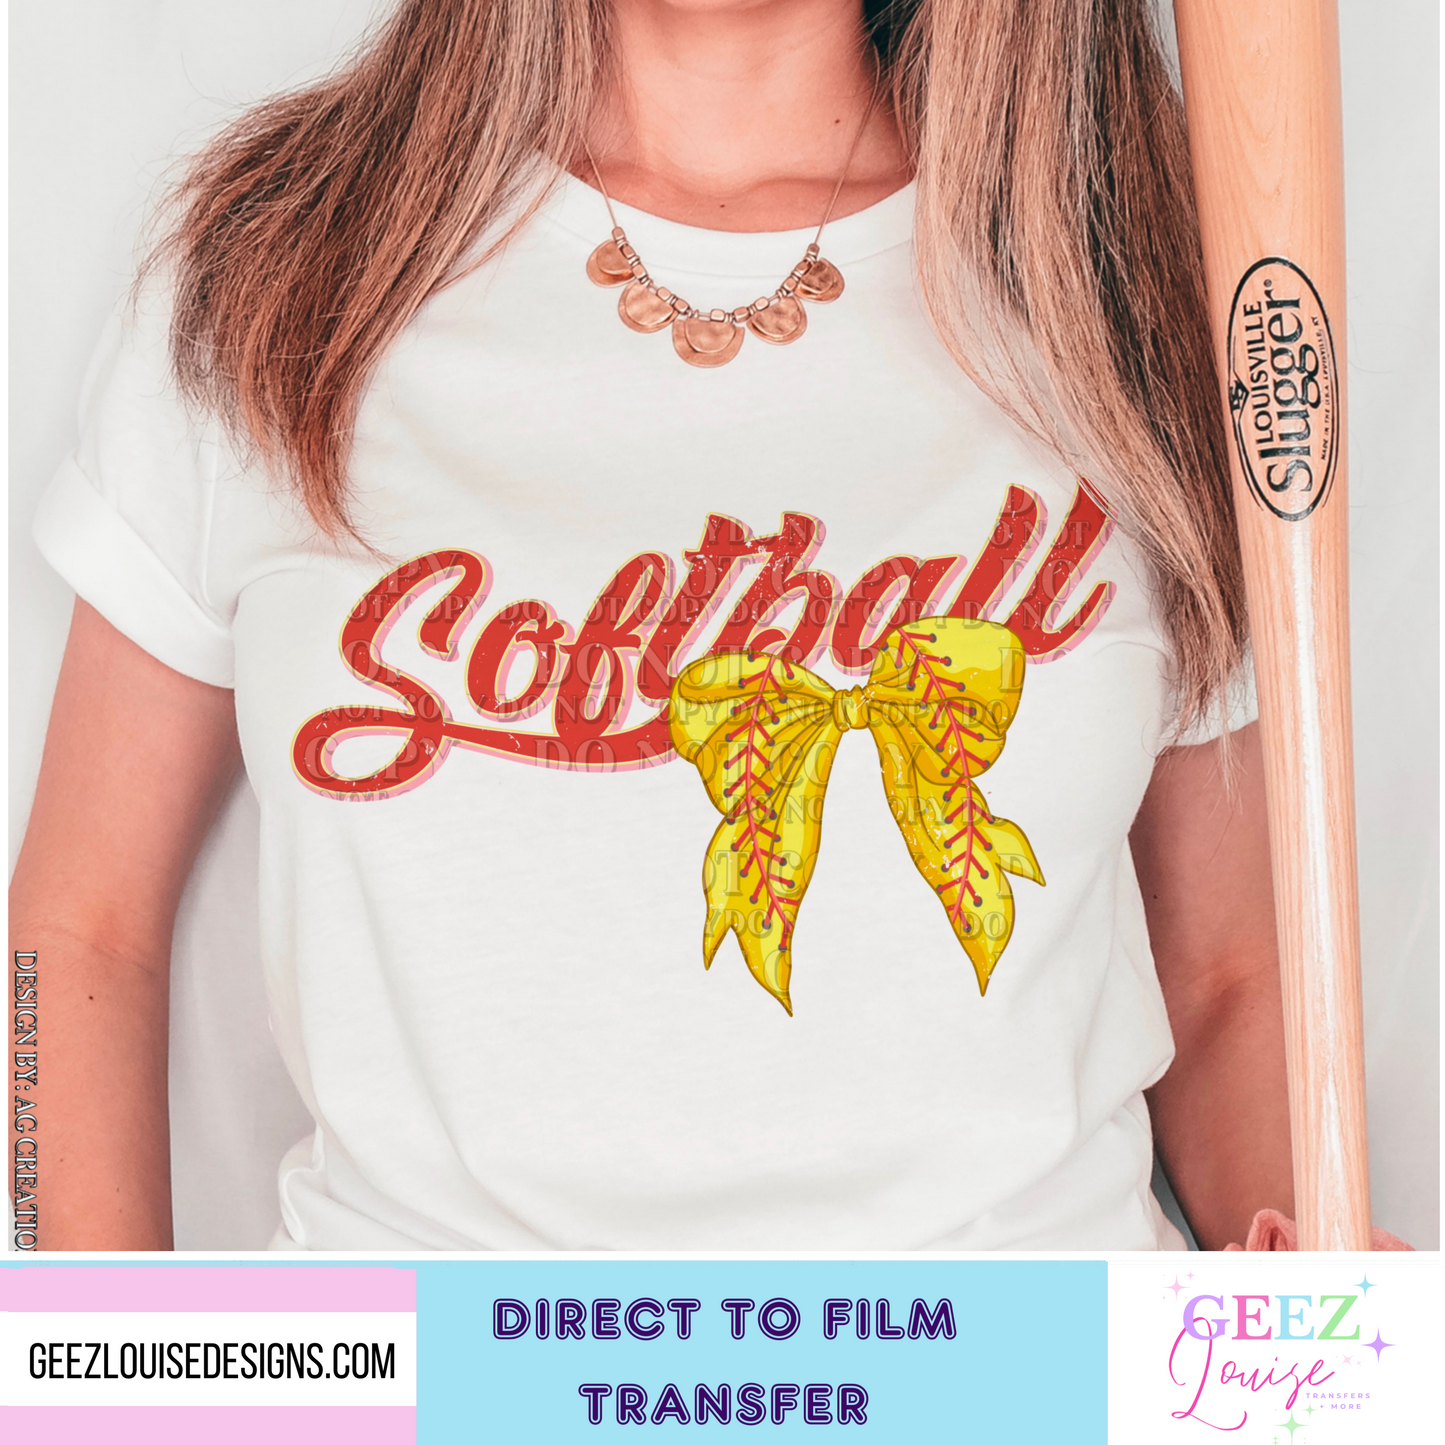 Softball - Direct to Film Transfer - made to order